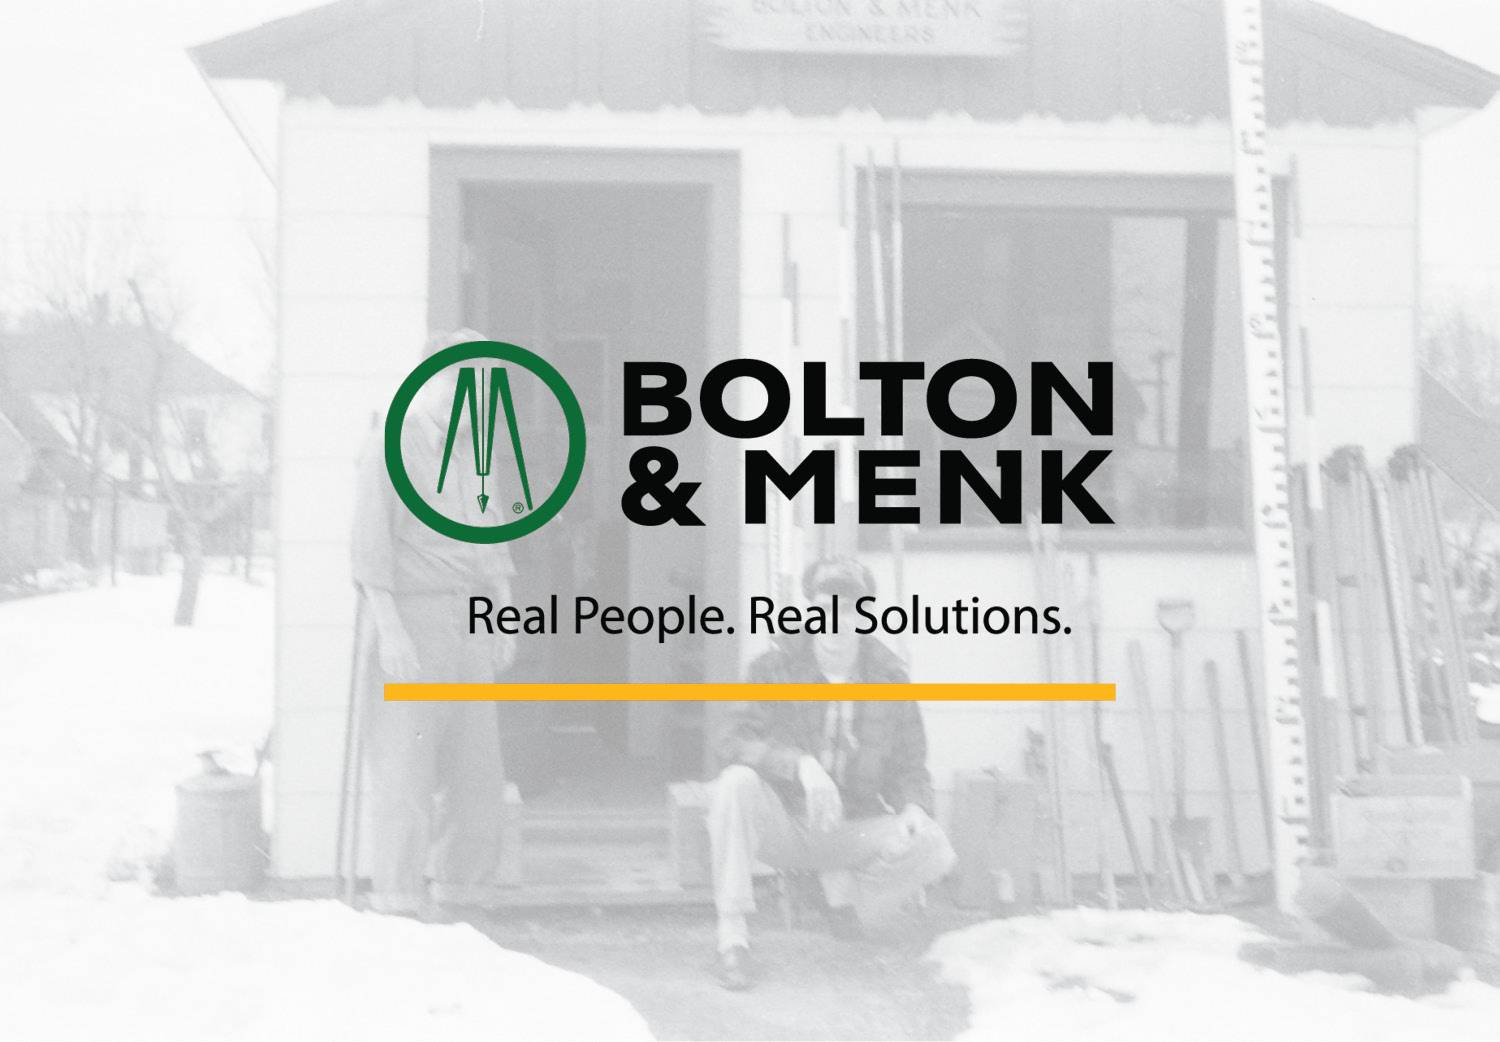 Aviation Services - Bolton & Menk